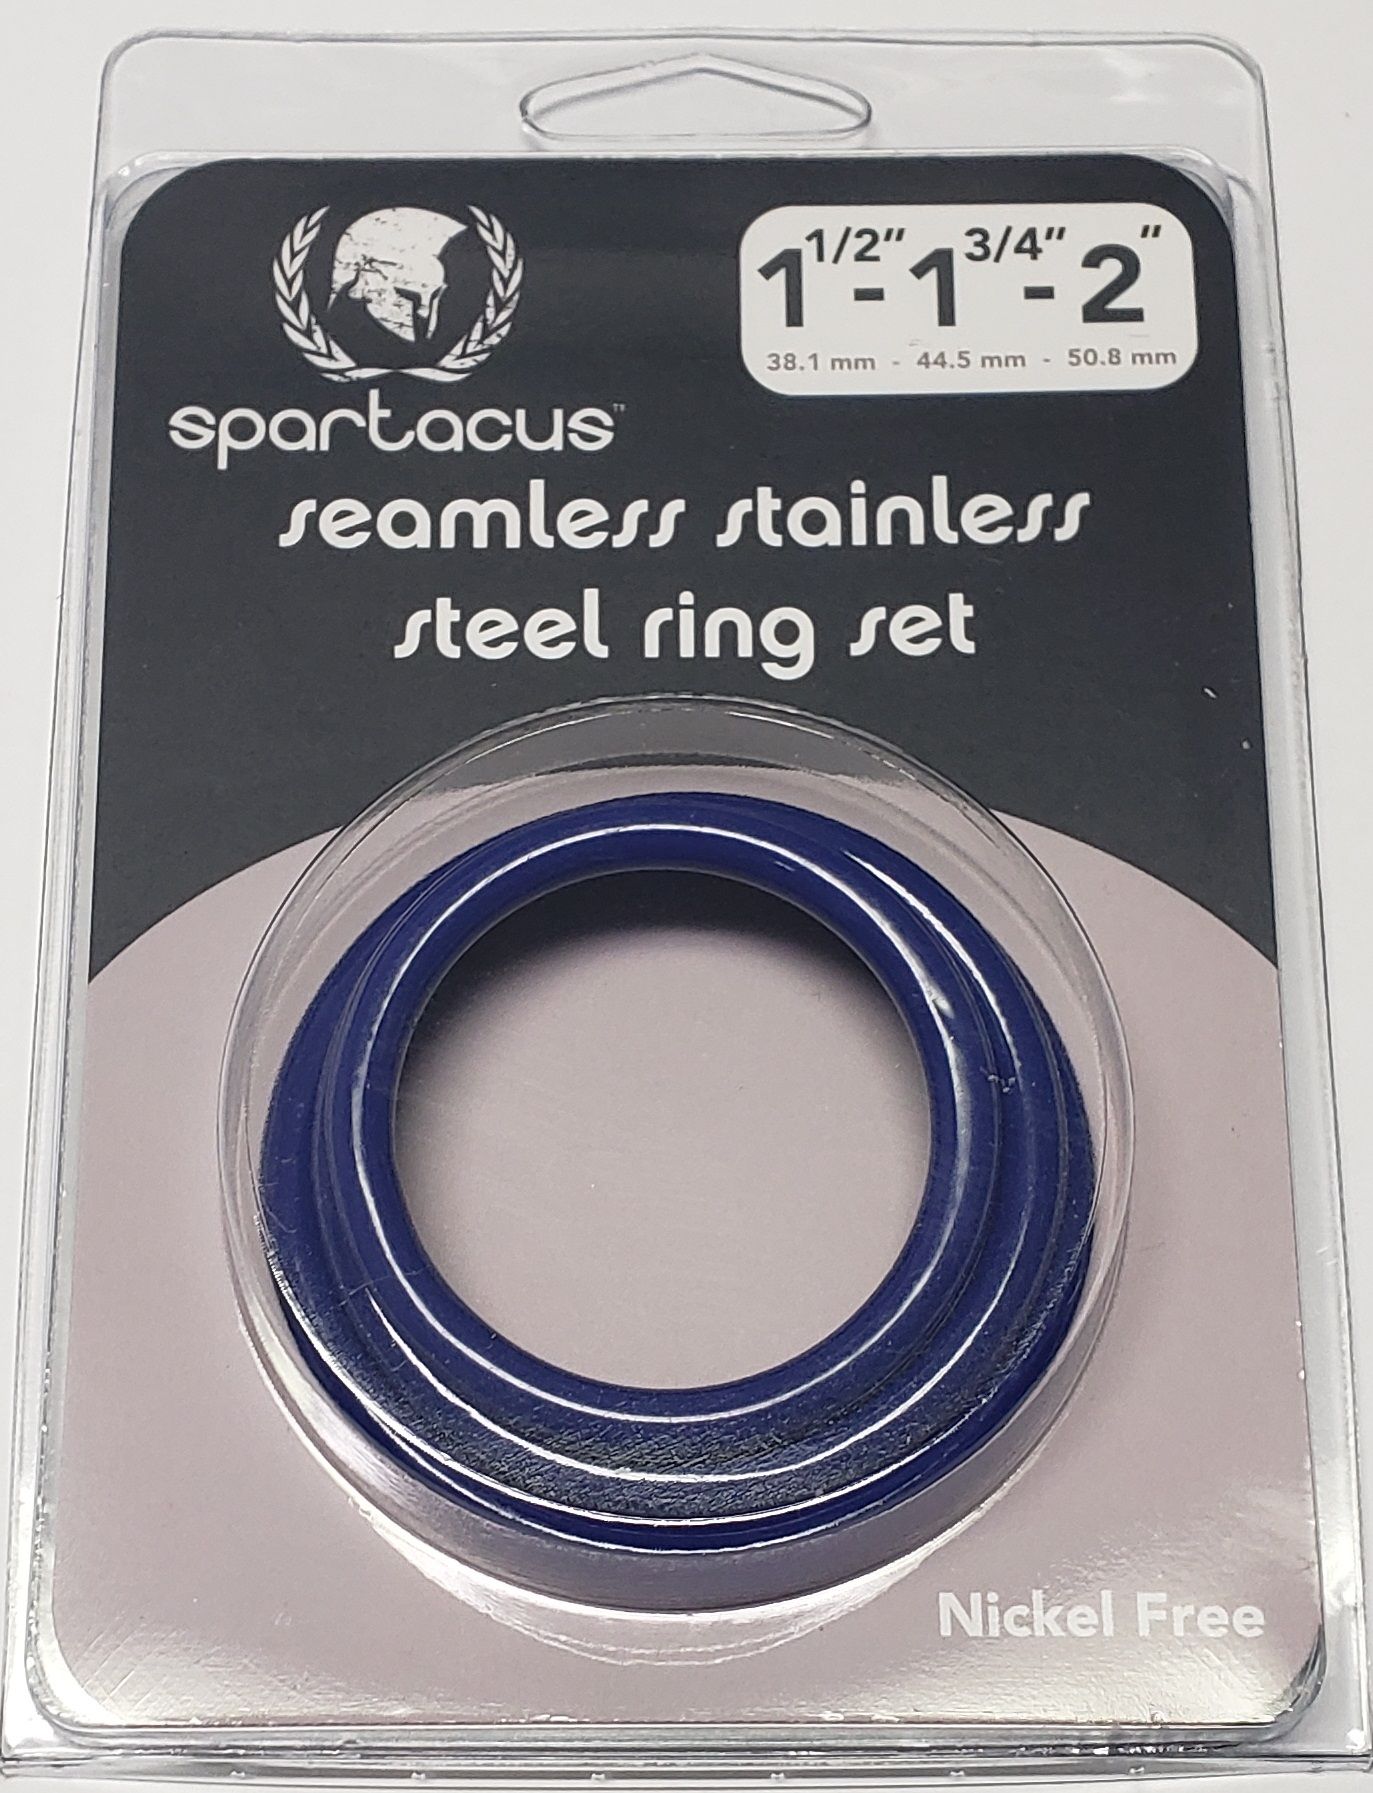 BLUE STAINLESS STEEL C-RING SET - 1.5 1.75" 2" " - Click Image to Close